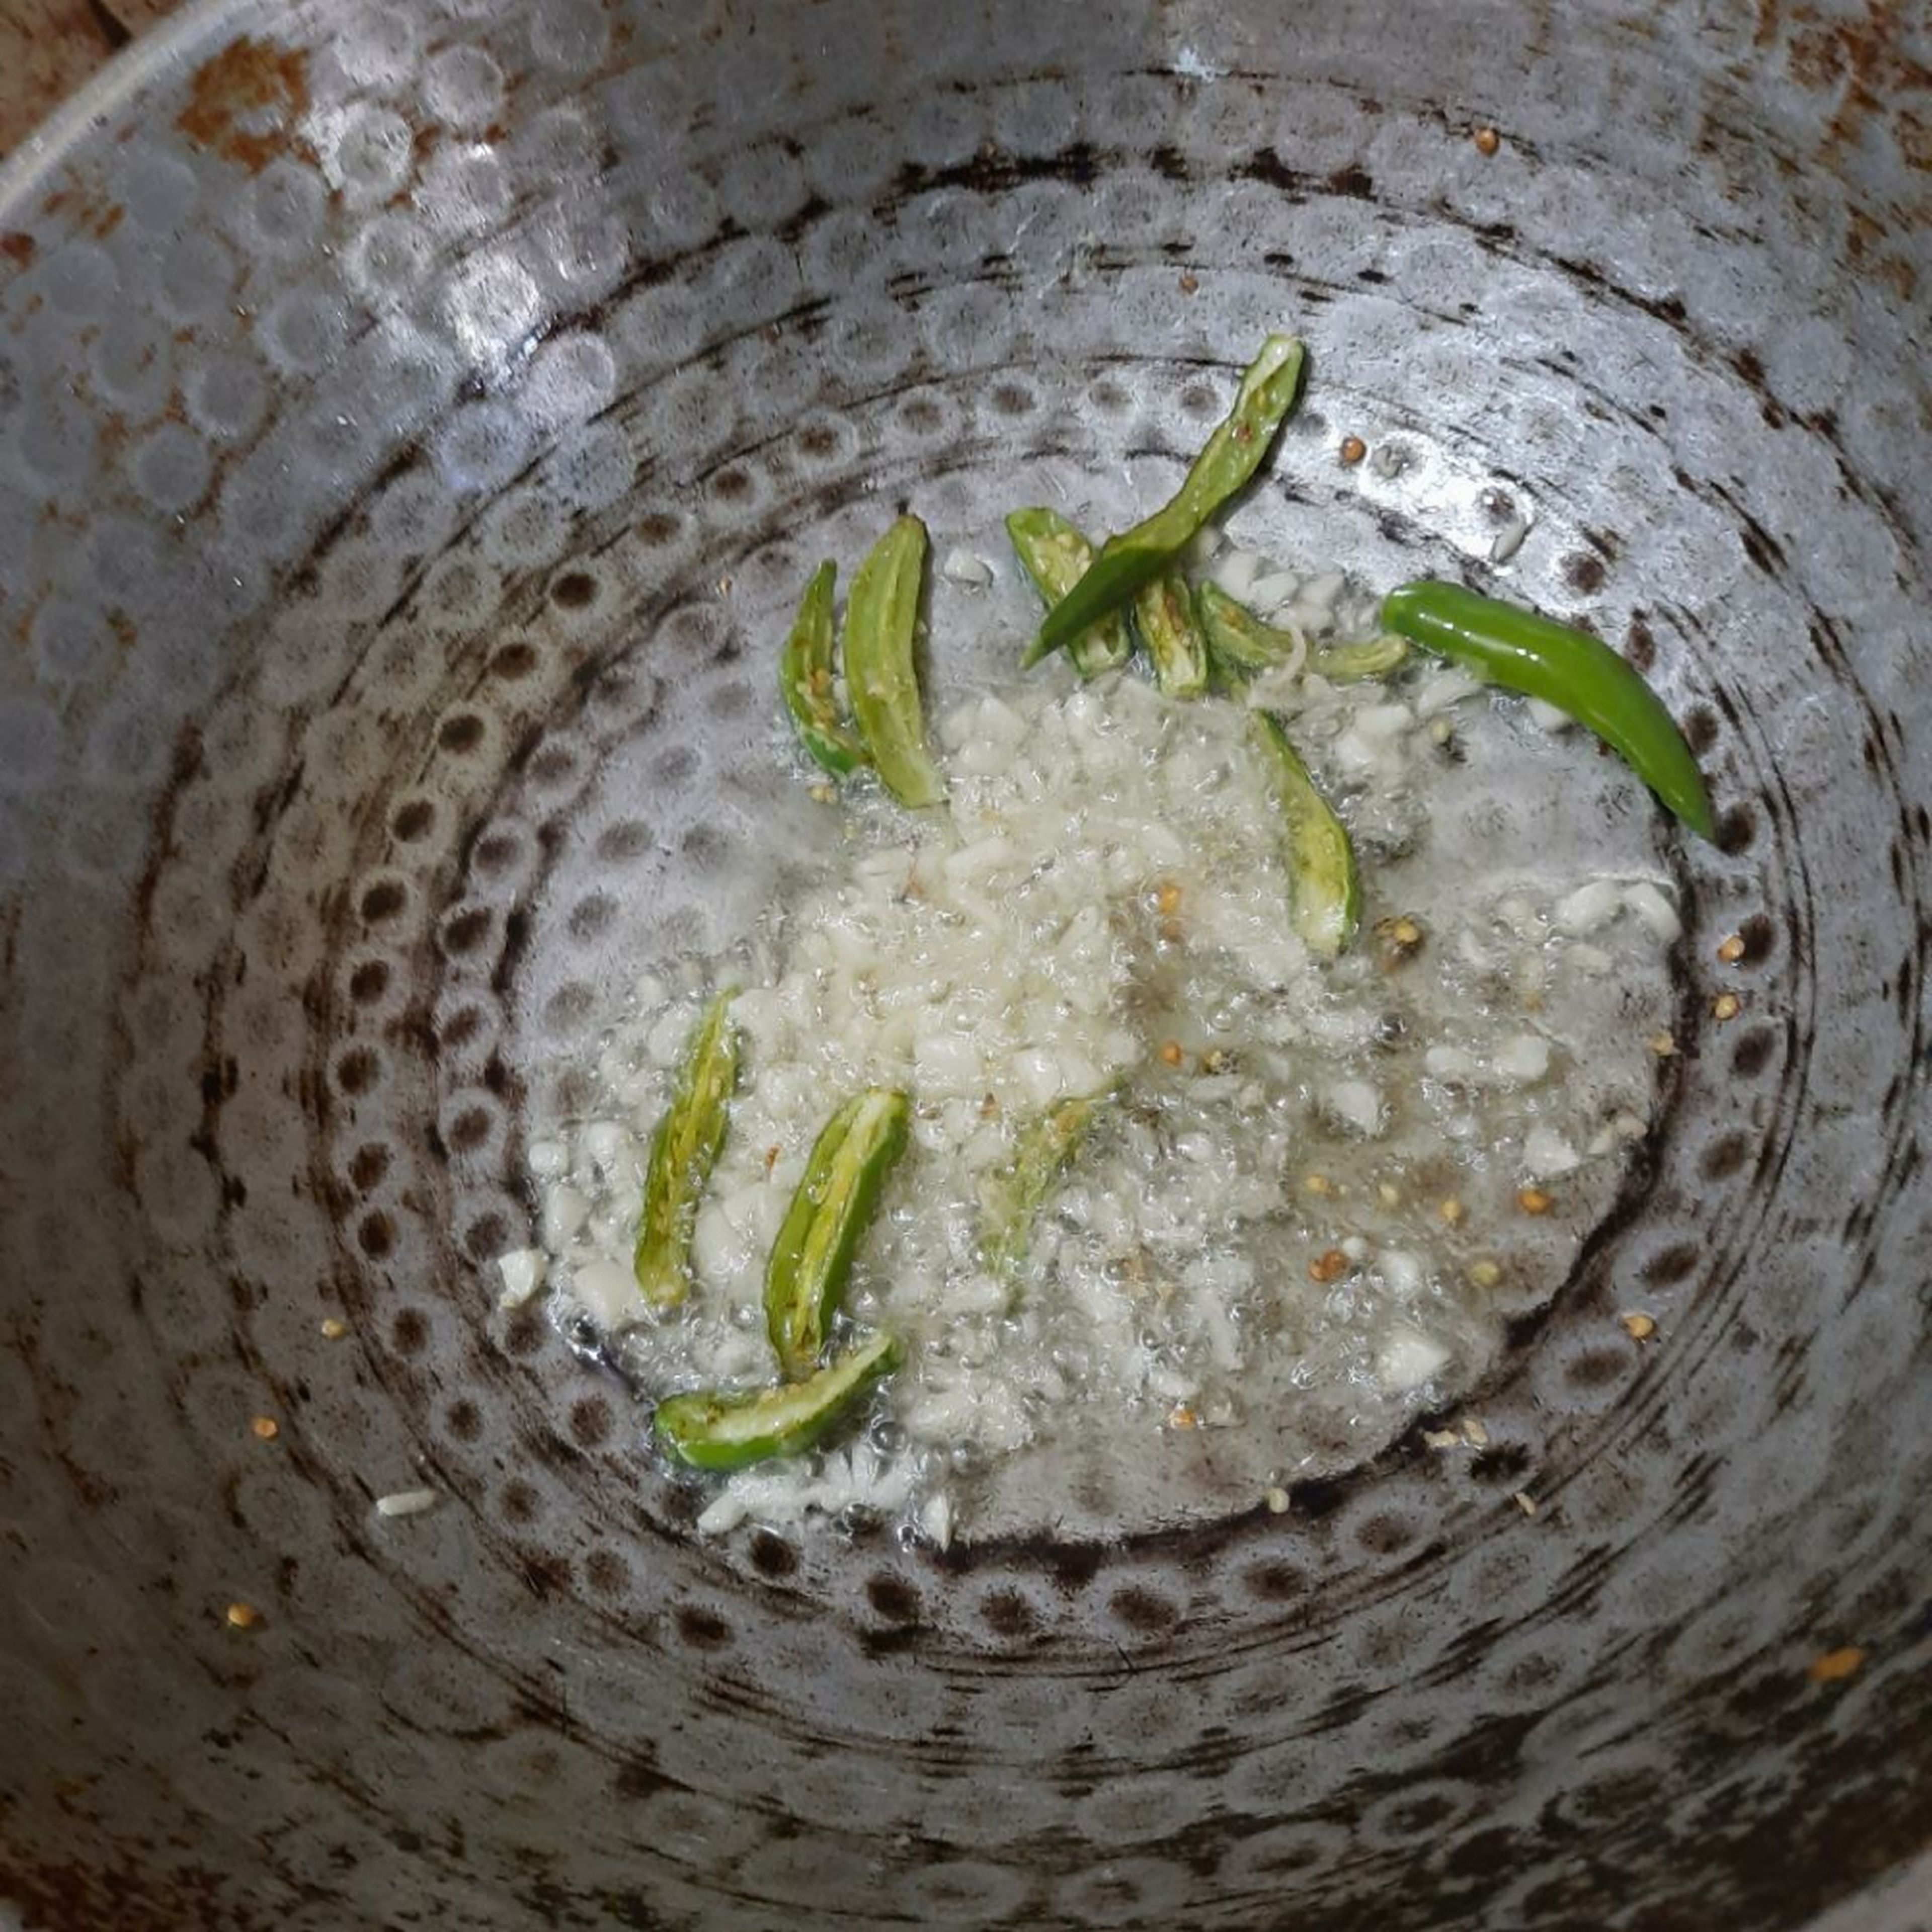 Heat the oil in the pan. Once heated, add the chopped garlic and green chillies.